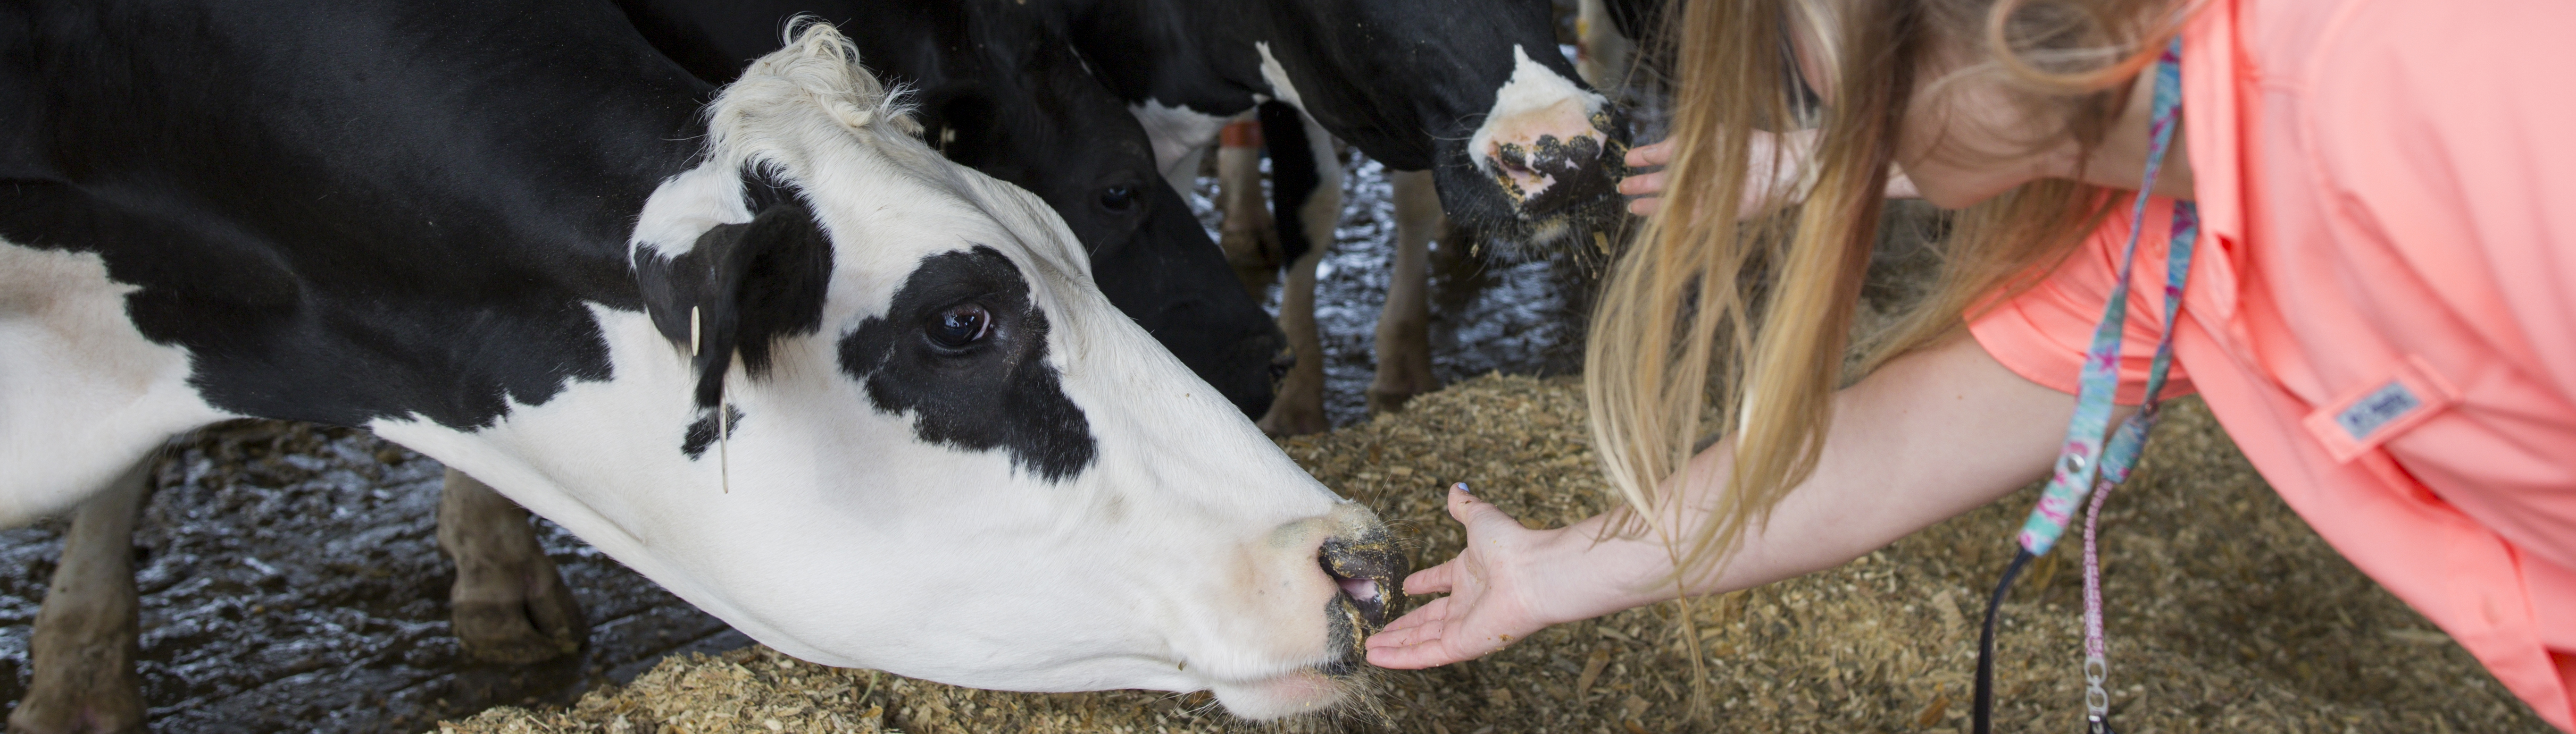 photo of young blonde girl reaching out and touching a black and white dairy cow's nose